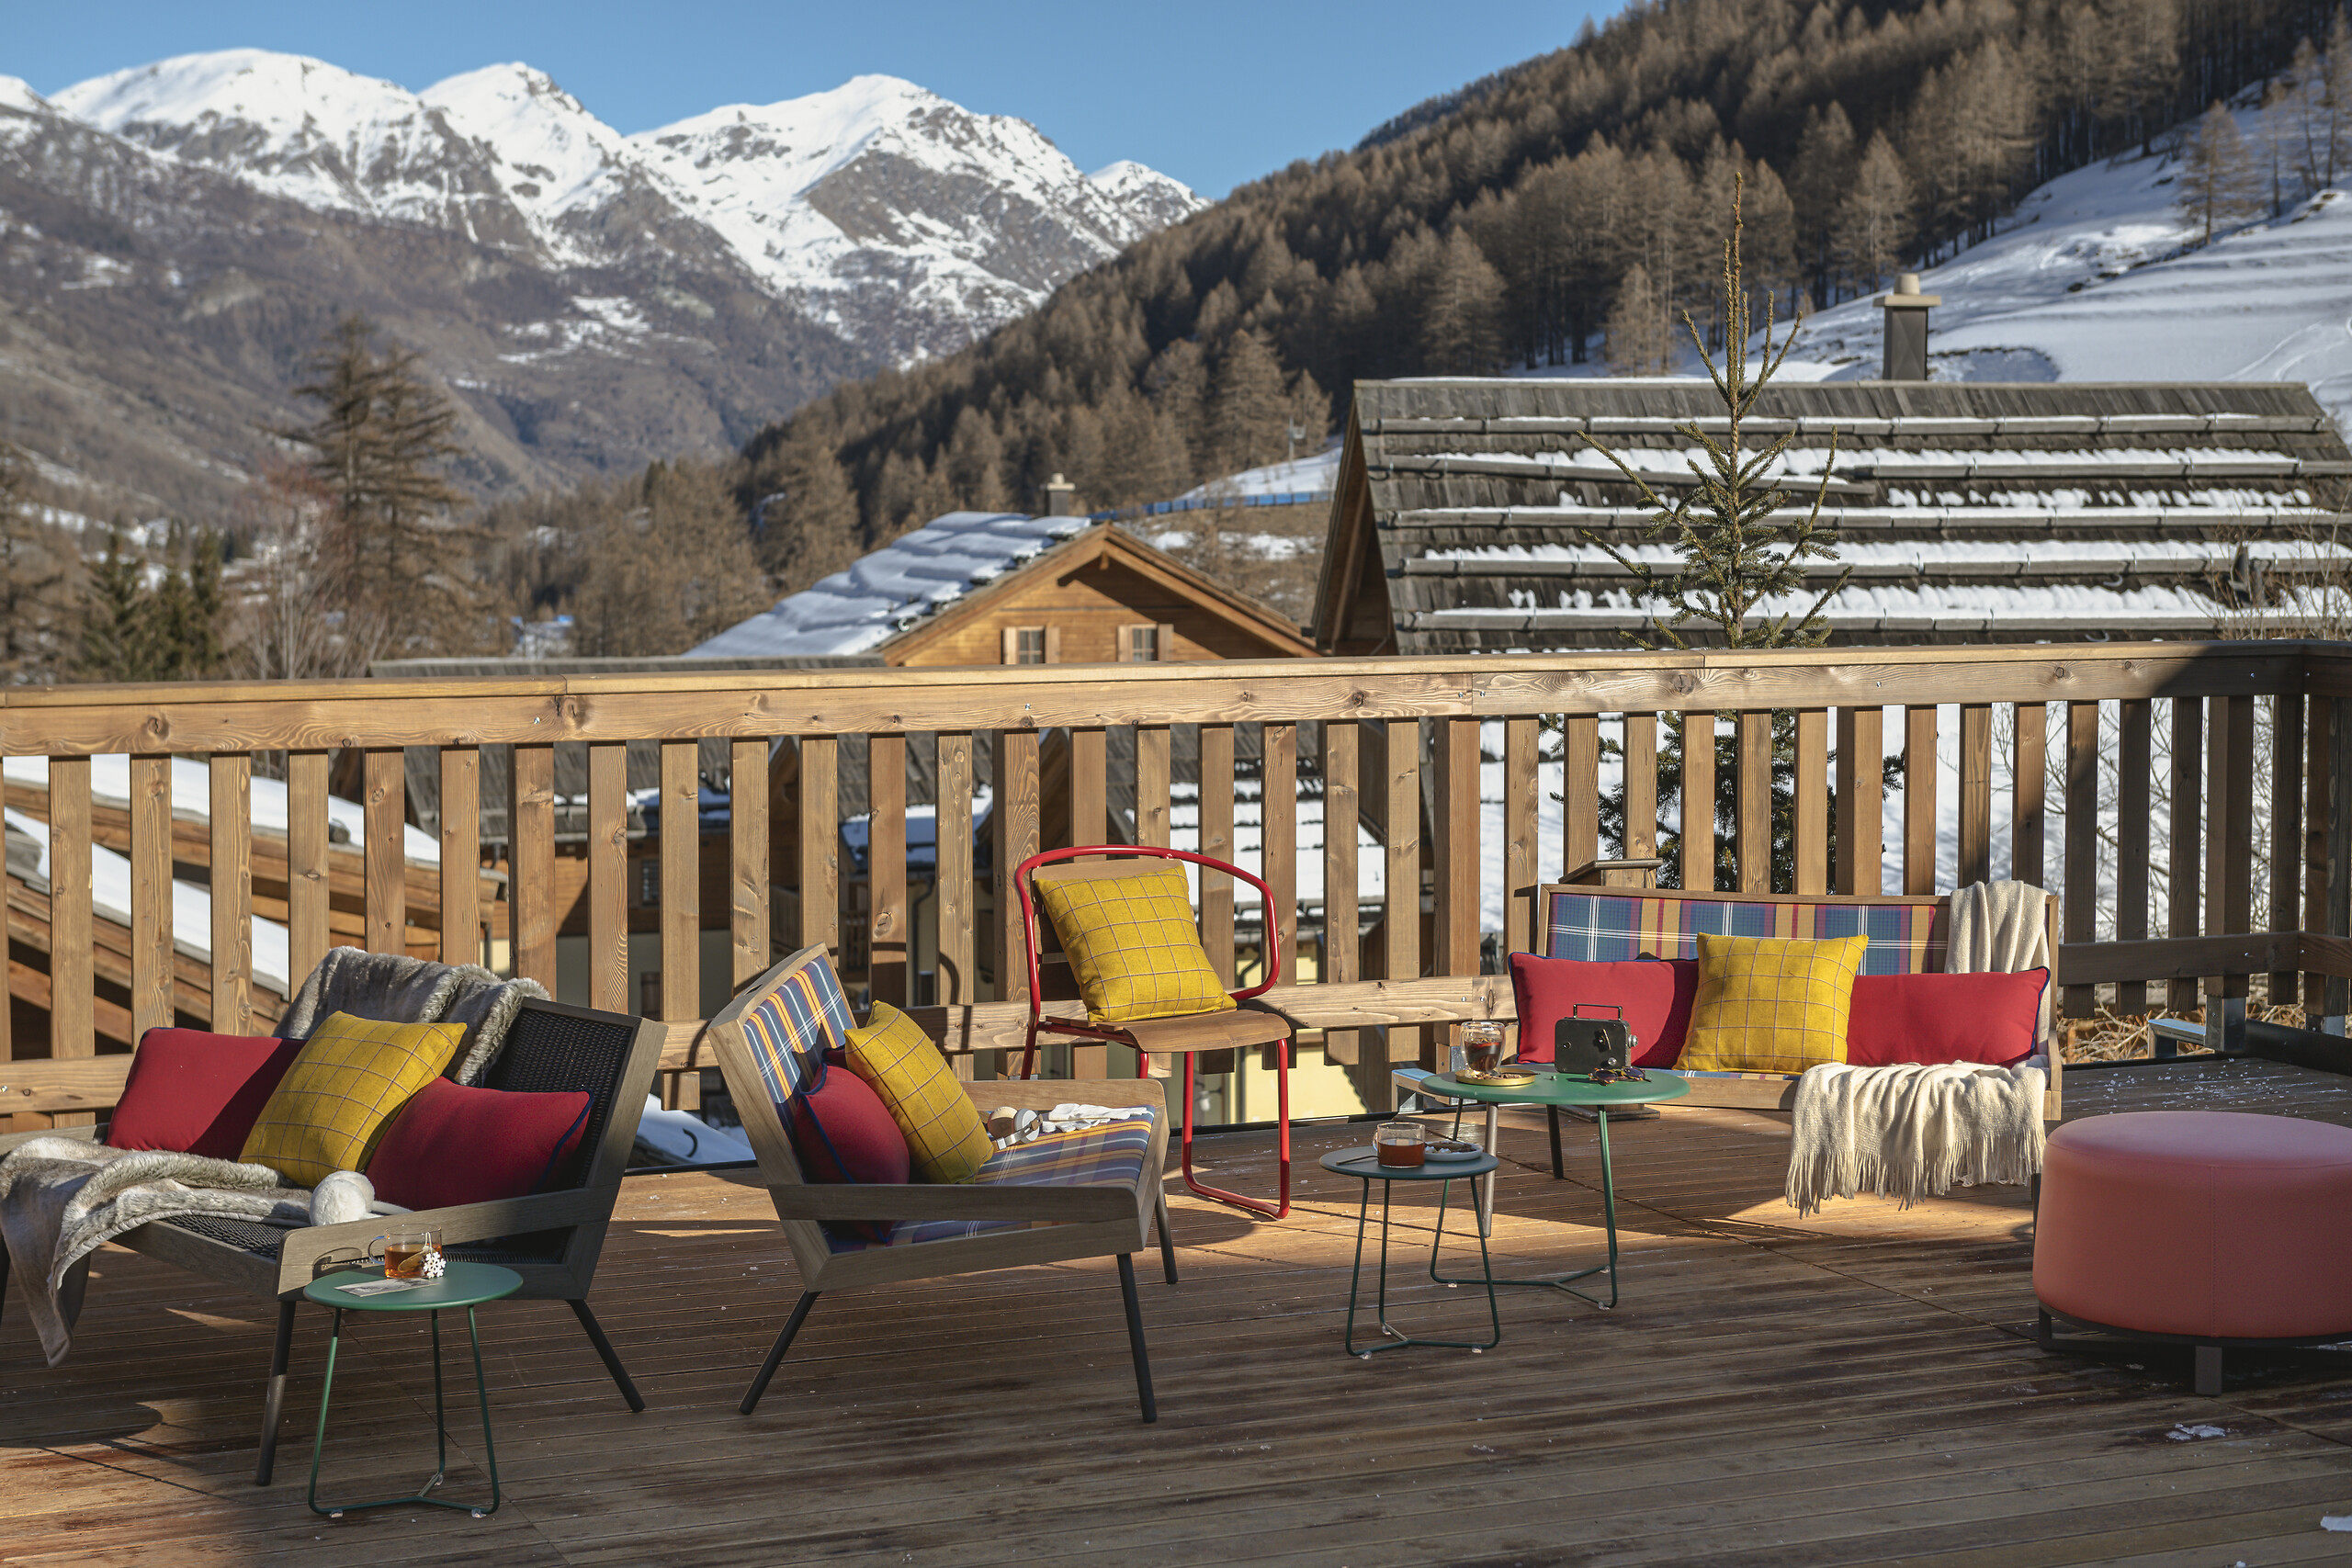 Club Med’s Pragelato Sestriere resort in Italy is among the destinations showing strong growth among Southeast Asian tourists. Photo: Handout